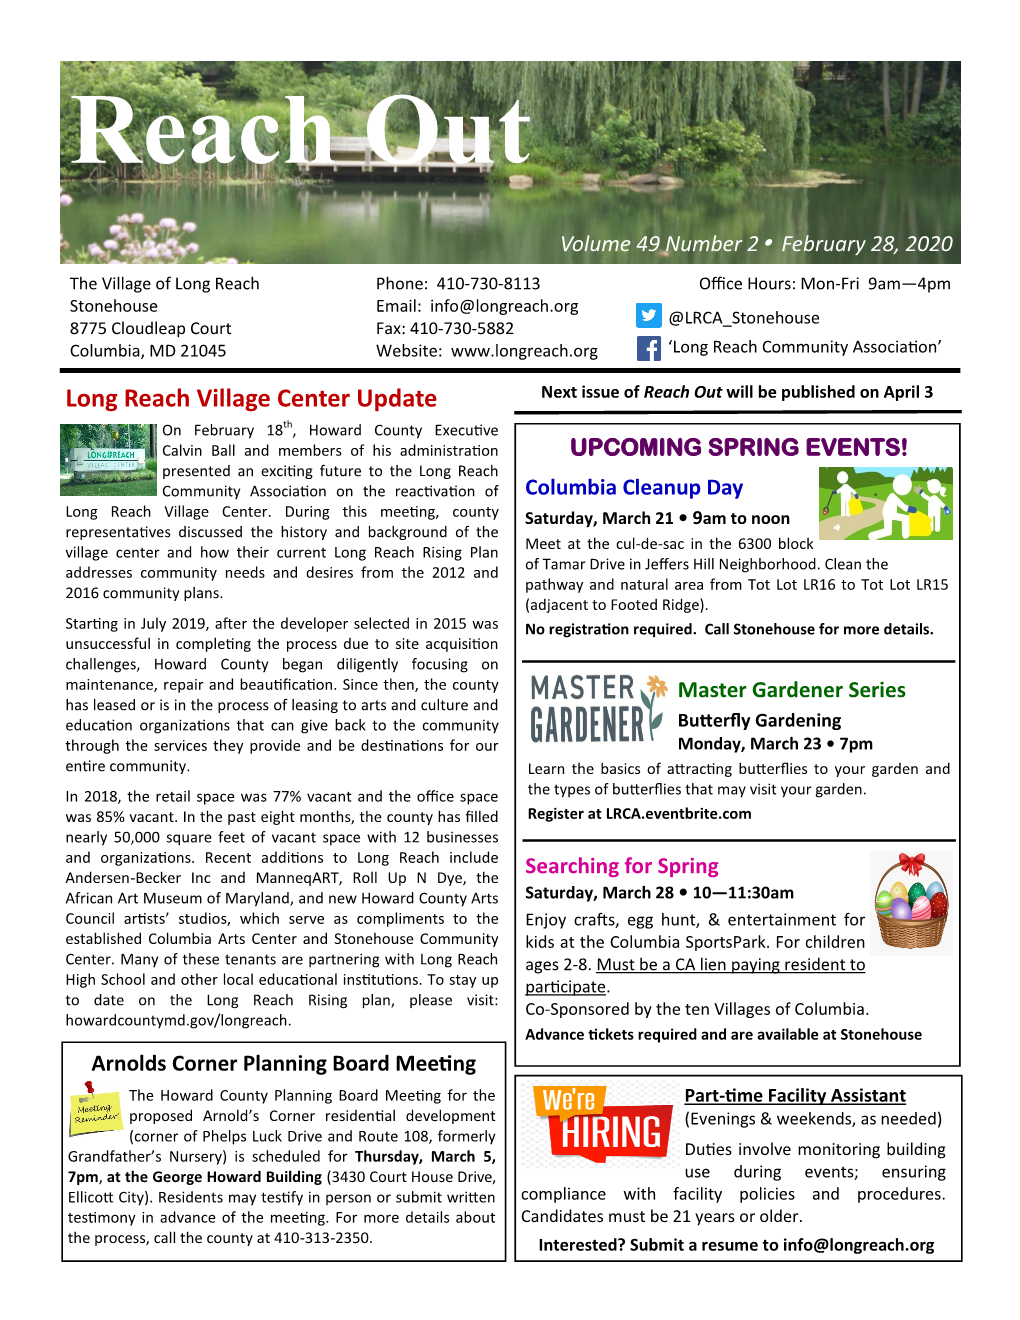 Long Reach Village Center Update Next Issue of Reach out Will Be Published on April 3